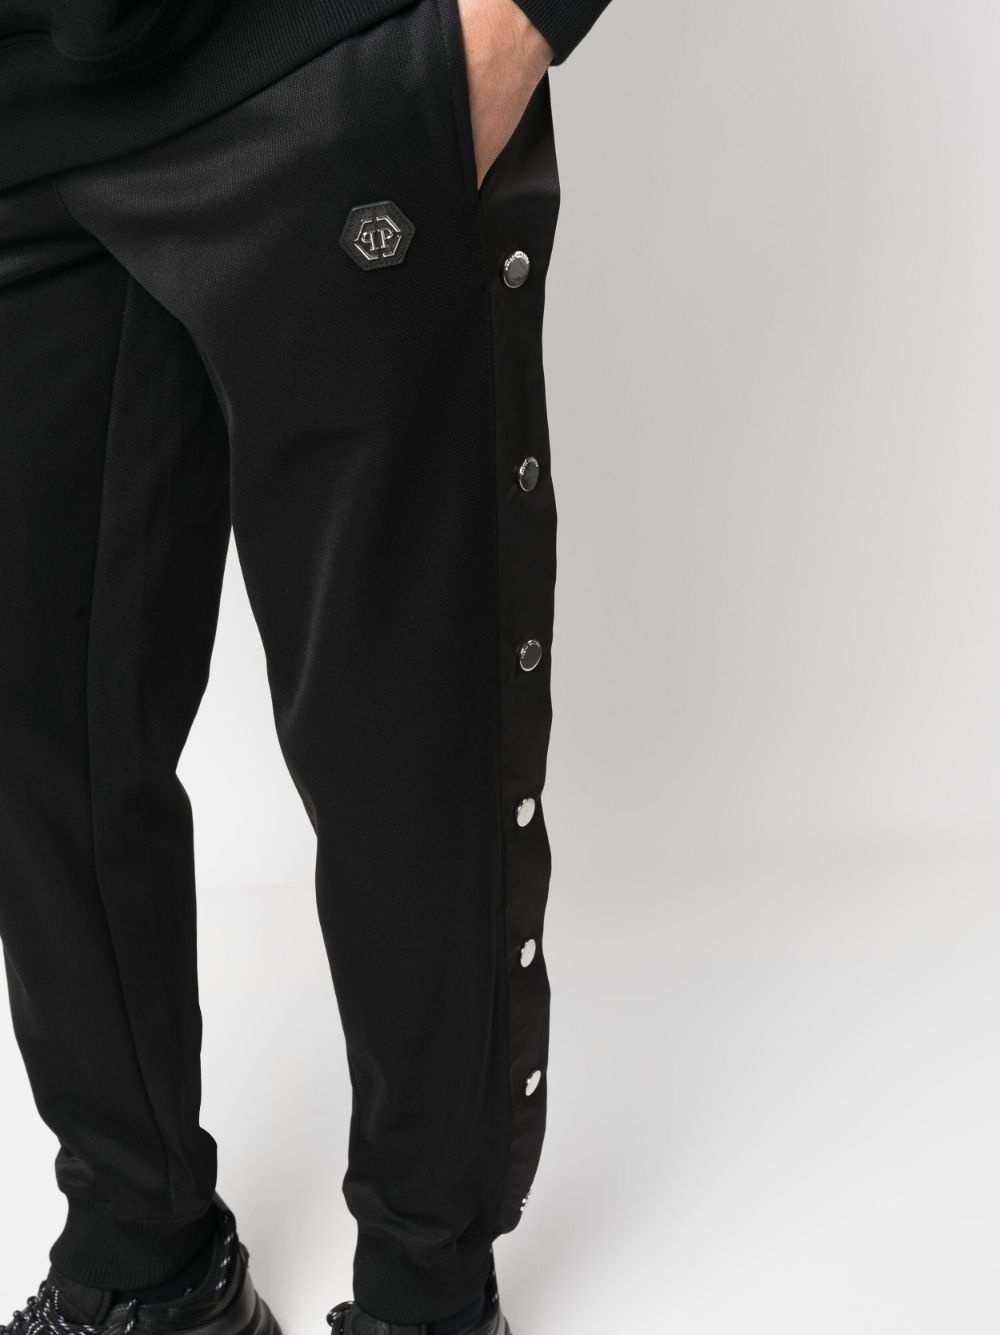 engraved-buttons drawstring track pants - 5